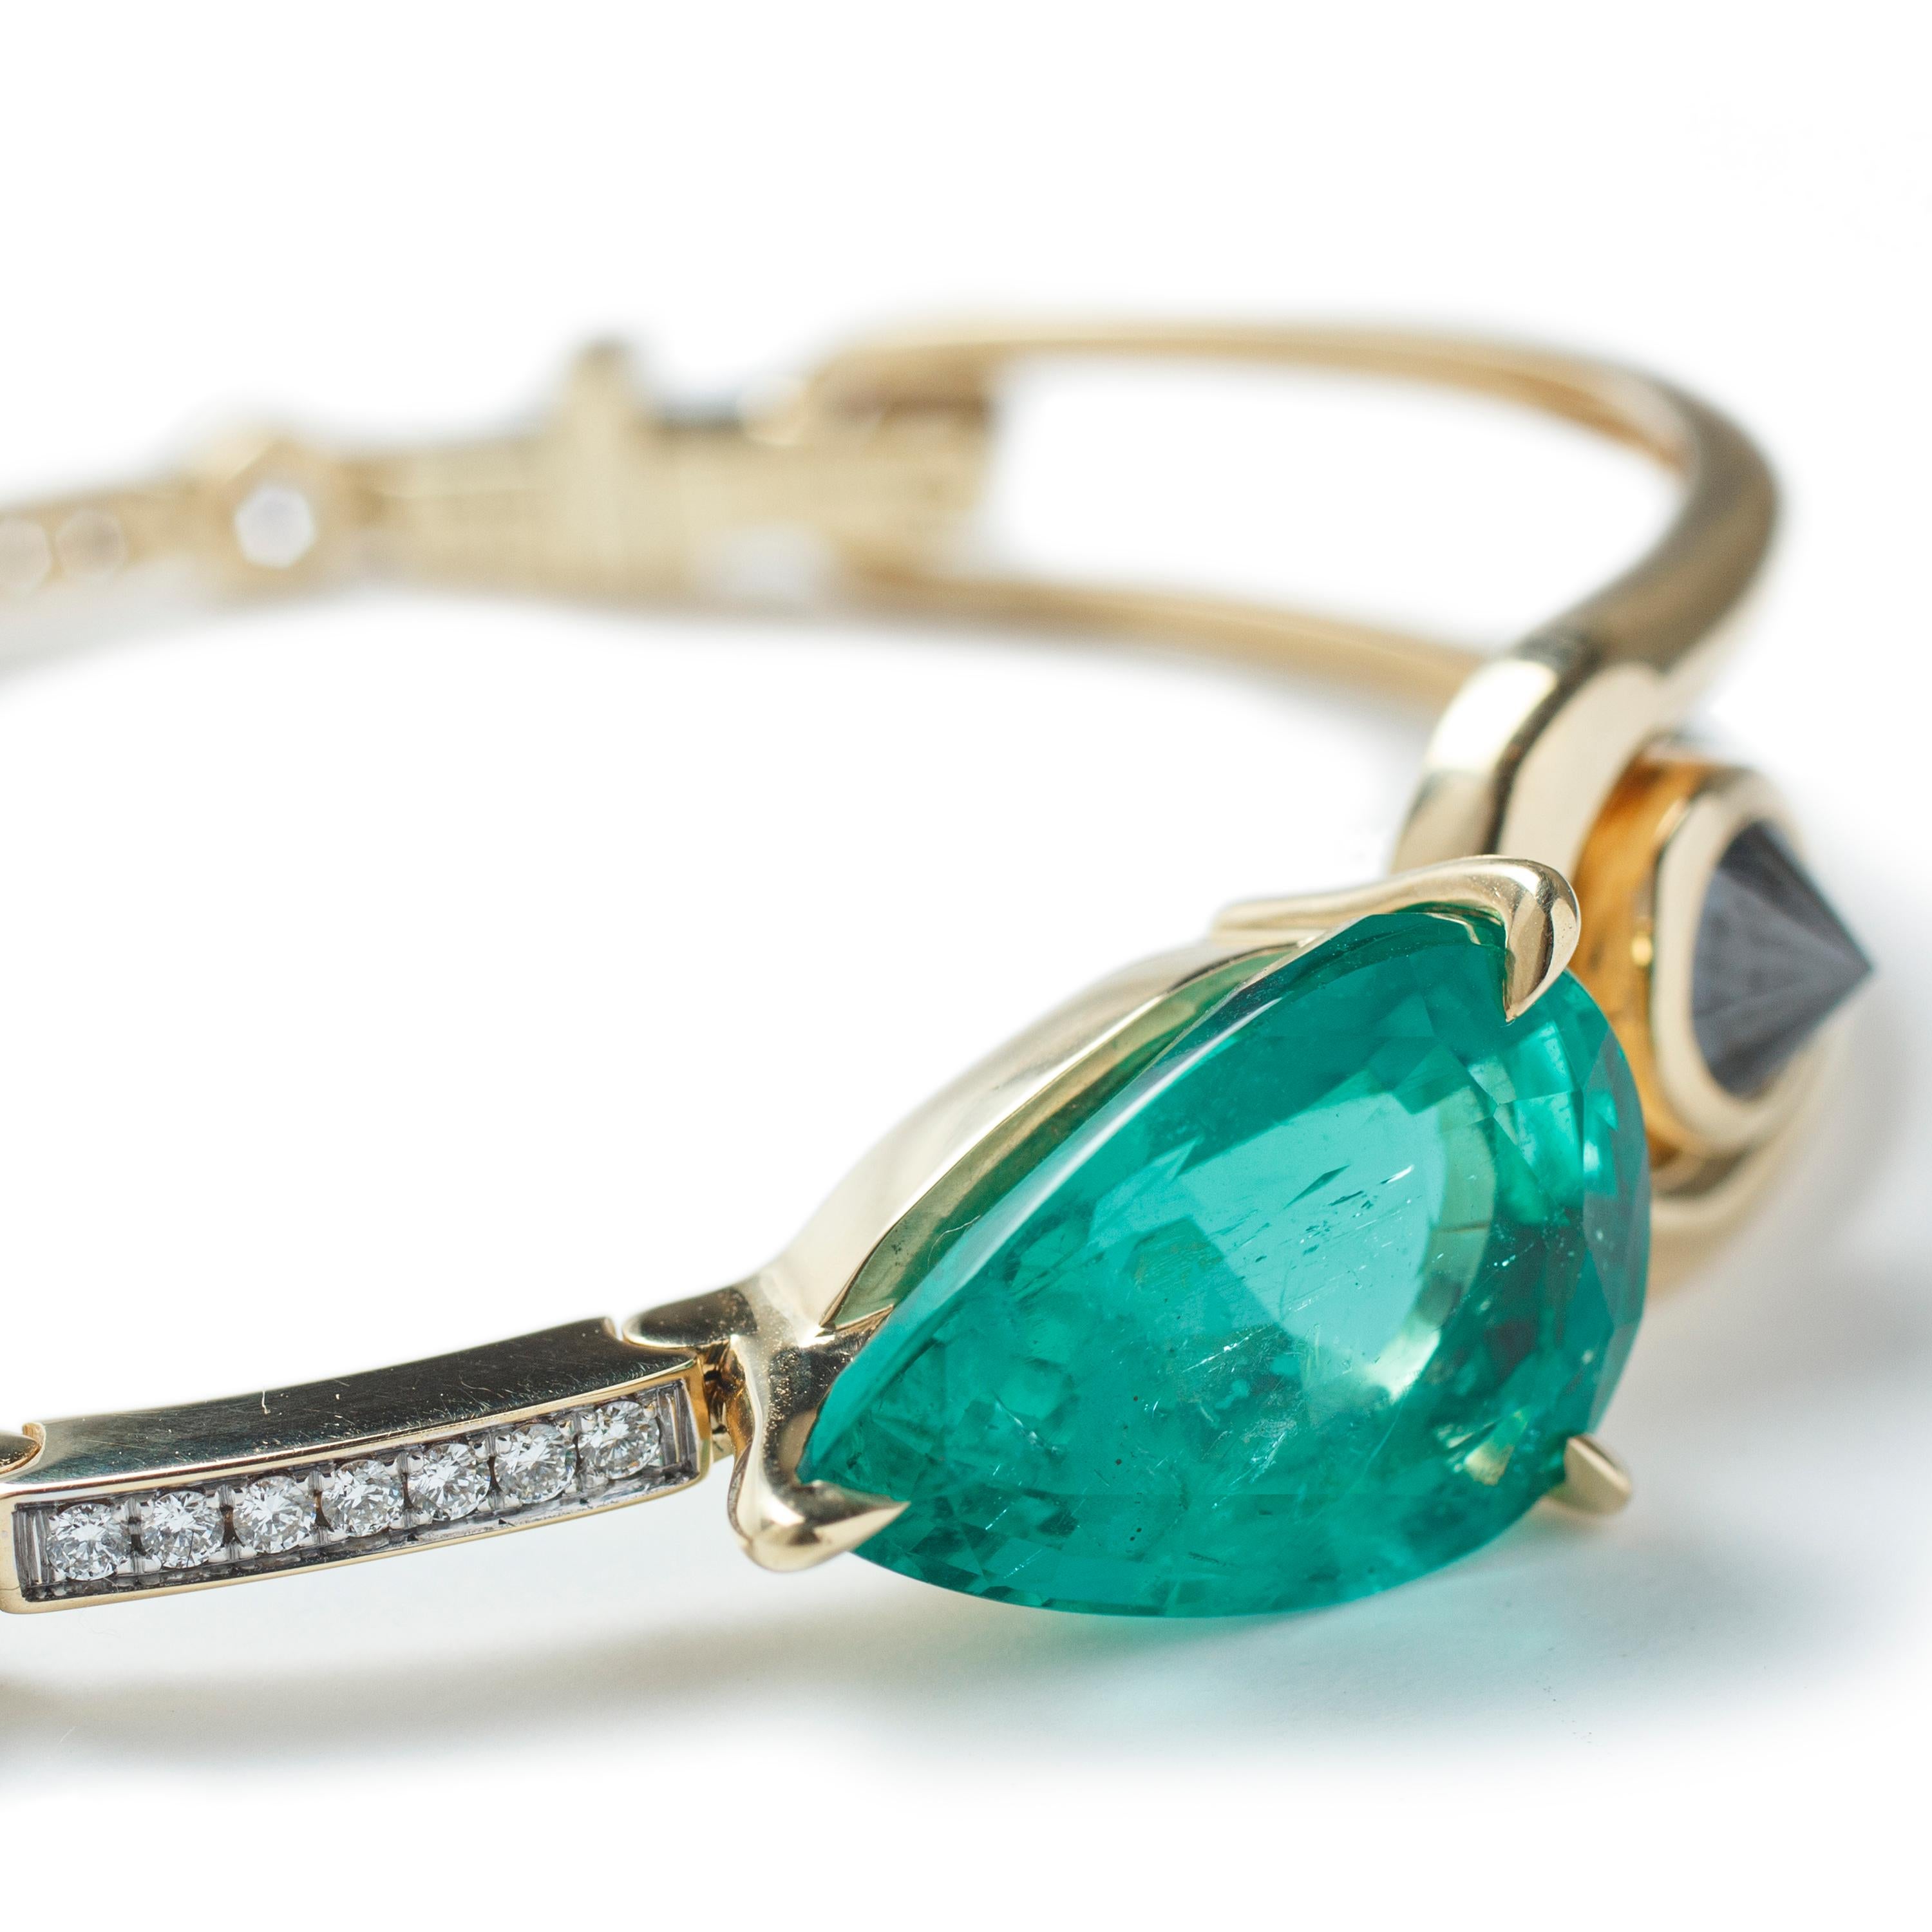 This 18k Yellow Gold hinged body Bracelet, features one Emerald in a pear faceted cut, along with Black and White Diamonds. 

This Bracelet has been exclusively designed by Ara Vartanian and was handcrafted in his Sao Paulo Atelier. For this